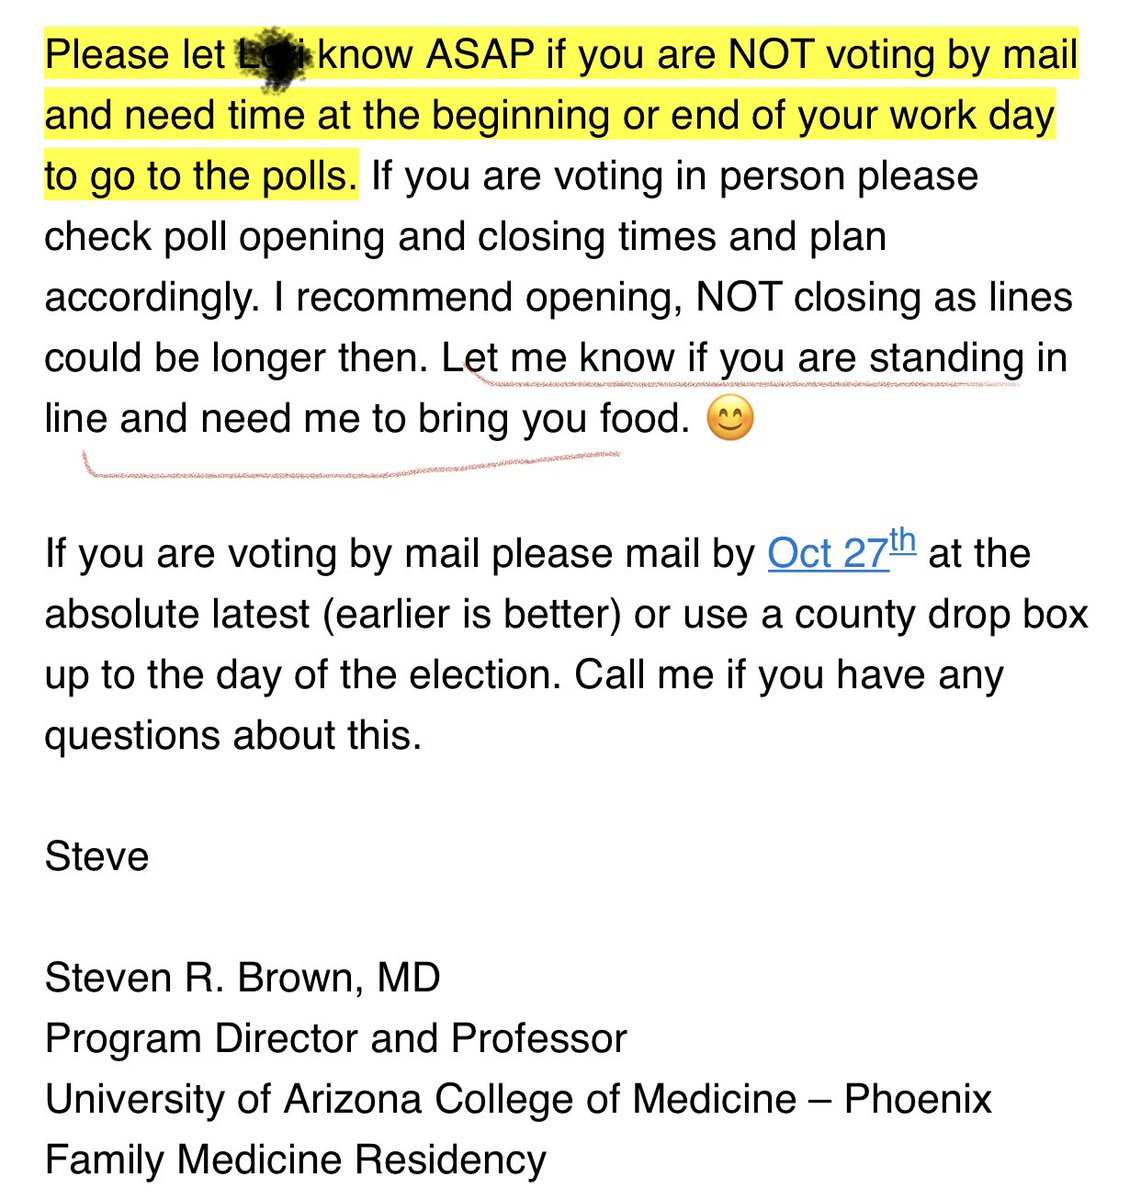 So great to work at a place that not only encourages you to #Vote and blocks time to make it happen, but also offers to bring you food if you’re stuck in line! Thanks for your leadership @UAPhxFamilyMed PD @SteveBrownMD!